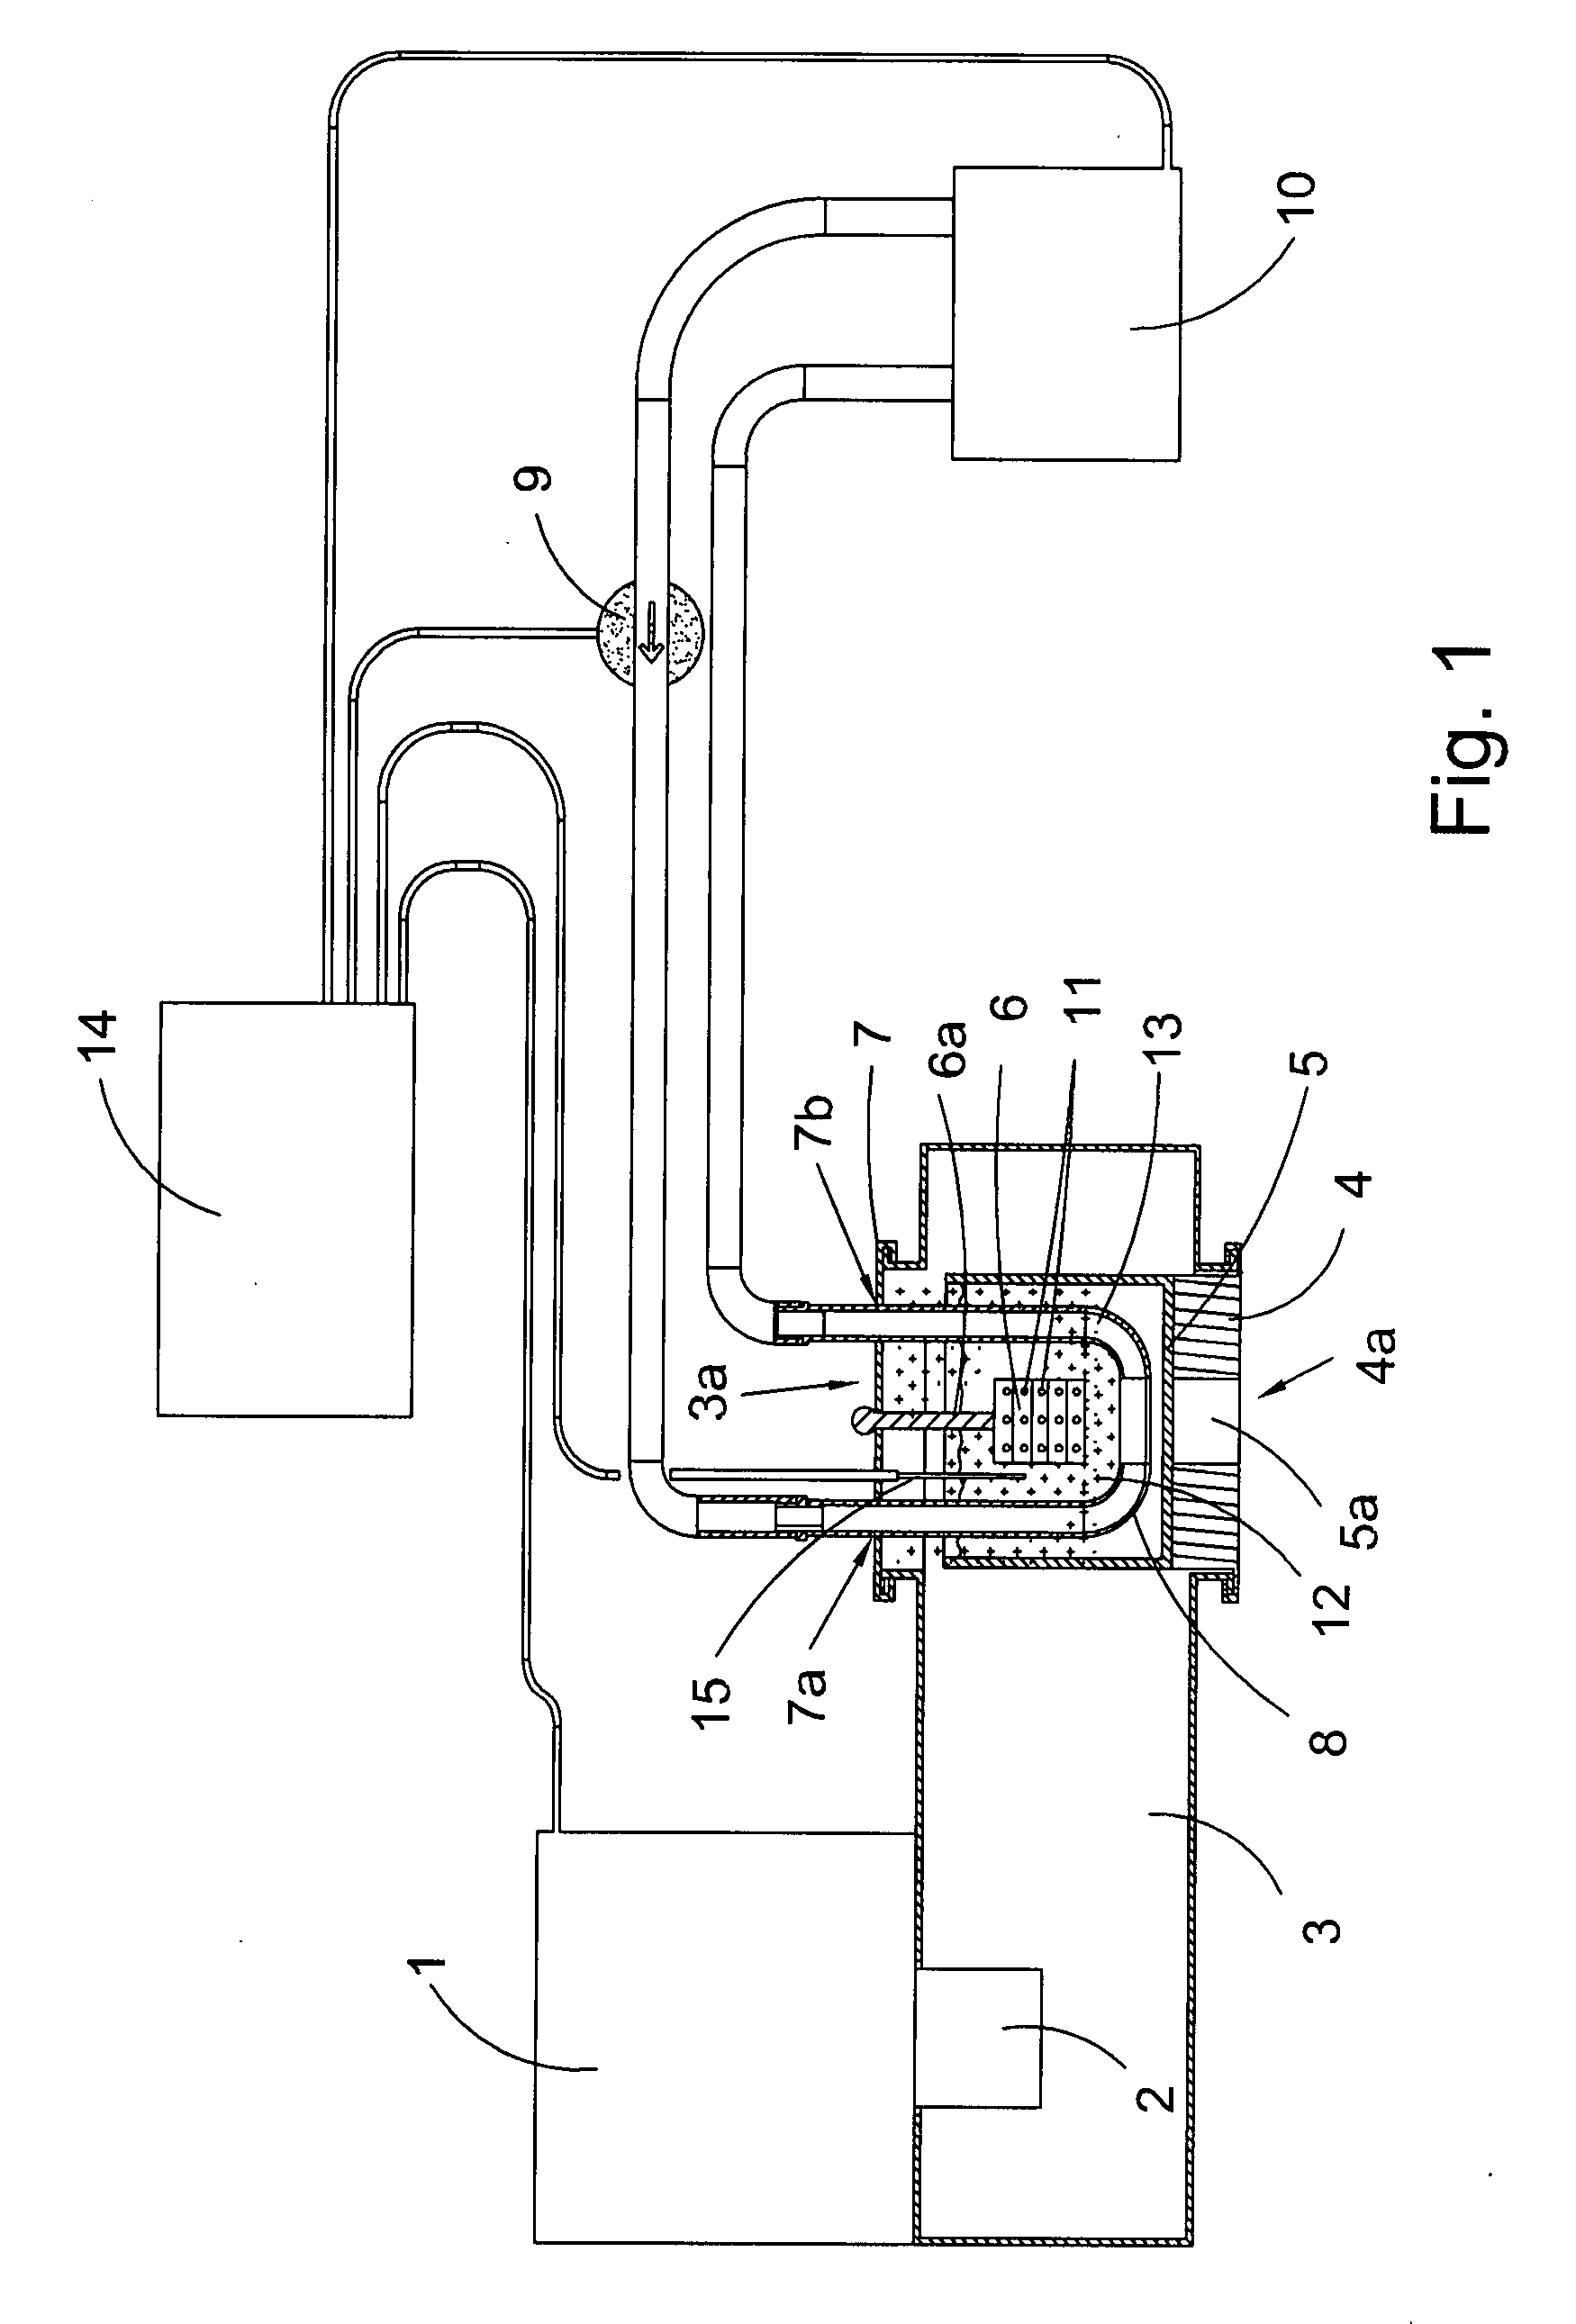 Apparatus for microwave-assisted specimen preparation